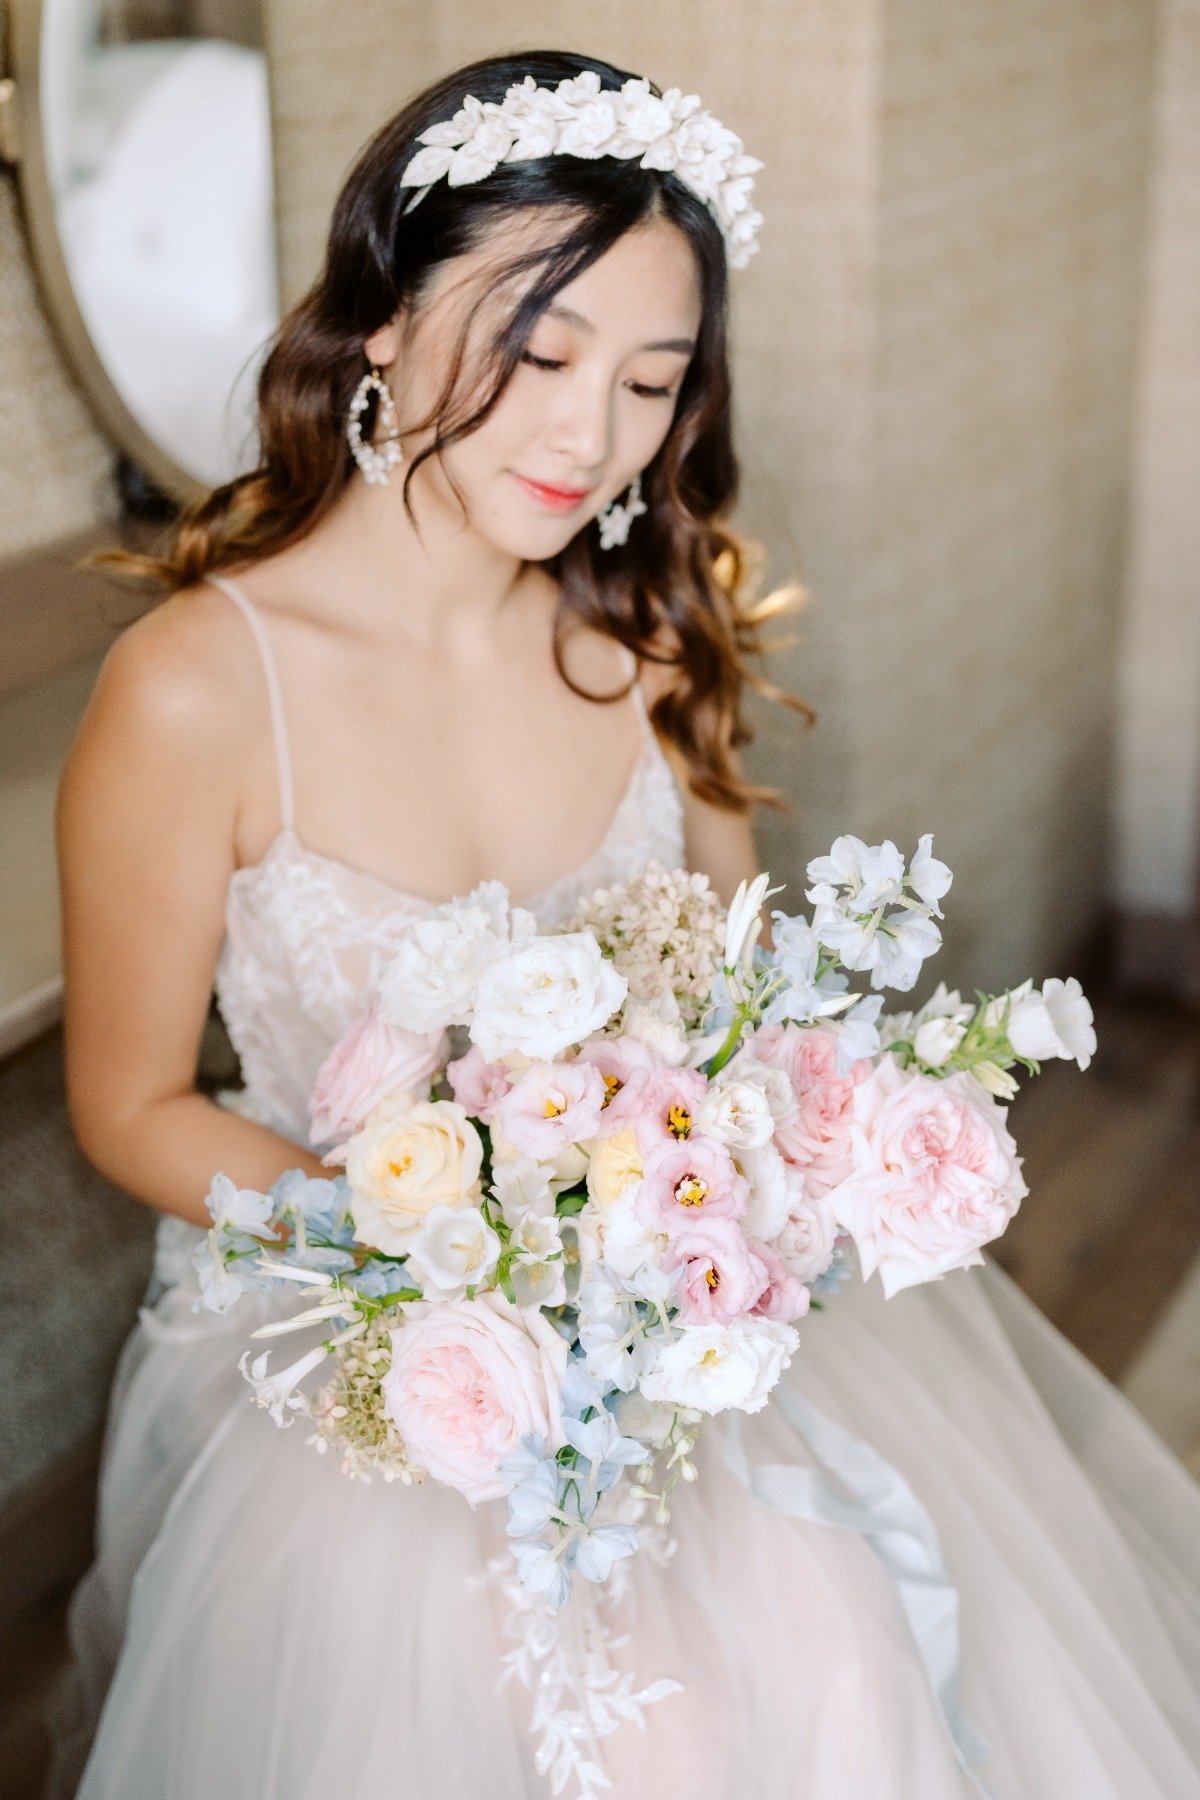 bride with white floral hatband with hair down in toussled waves holding blue and pink bouquet